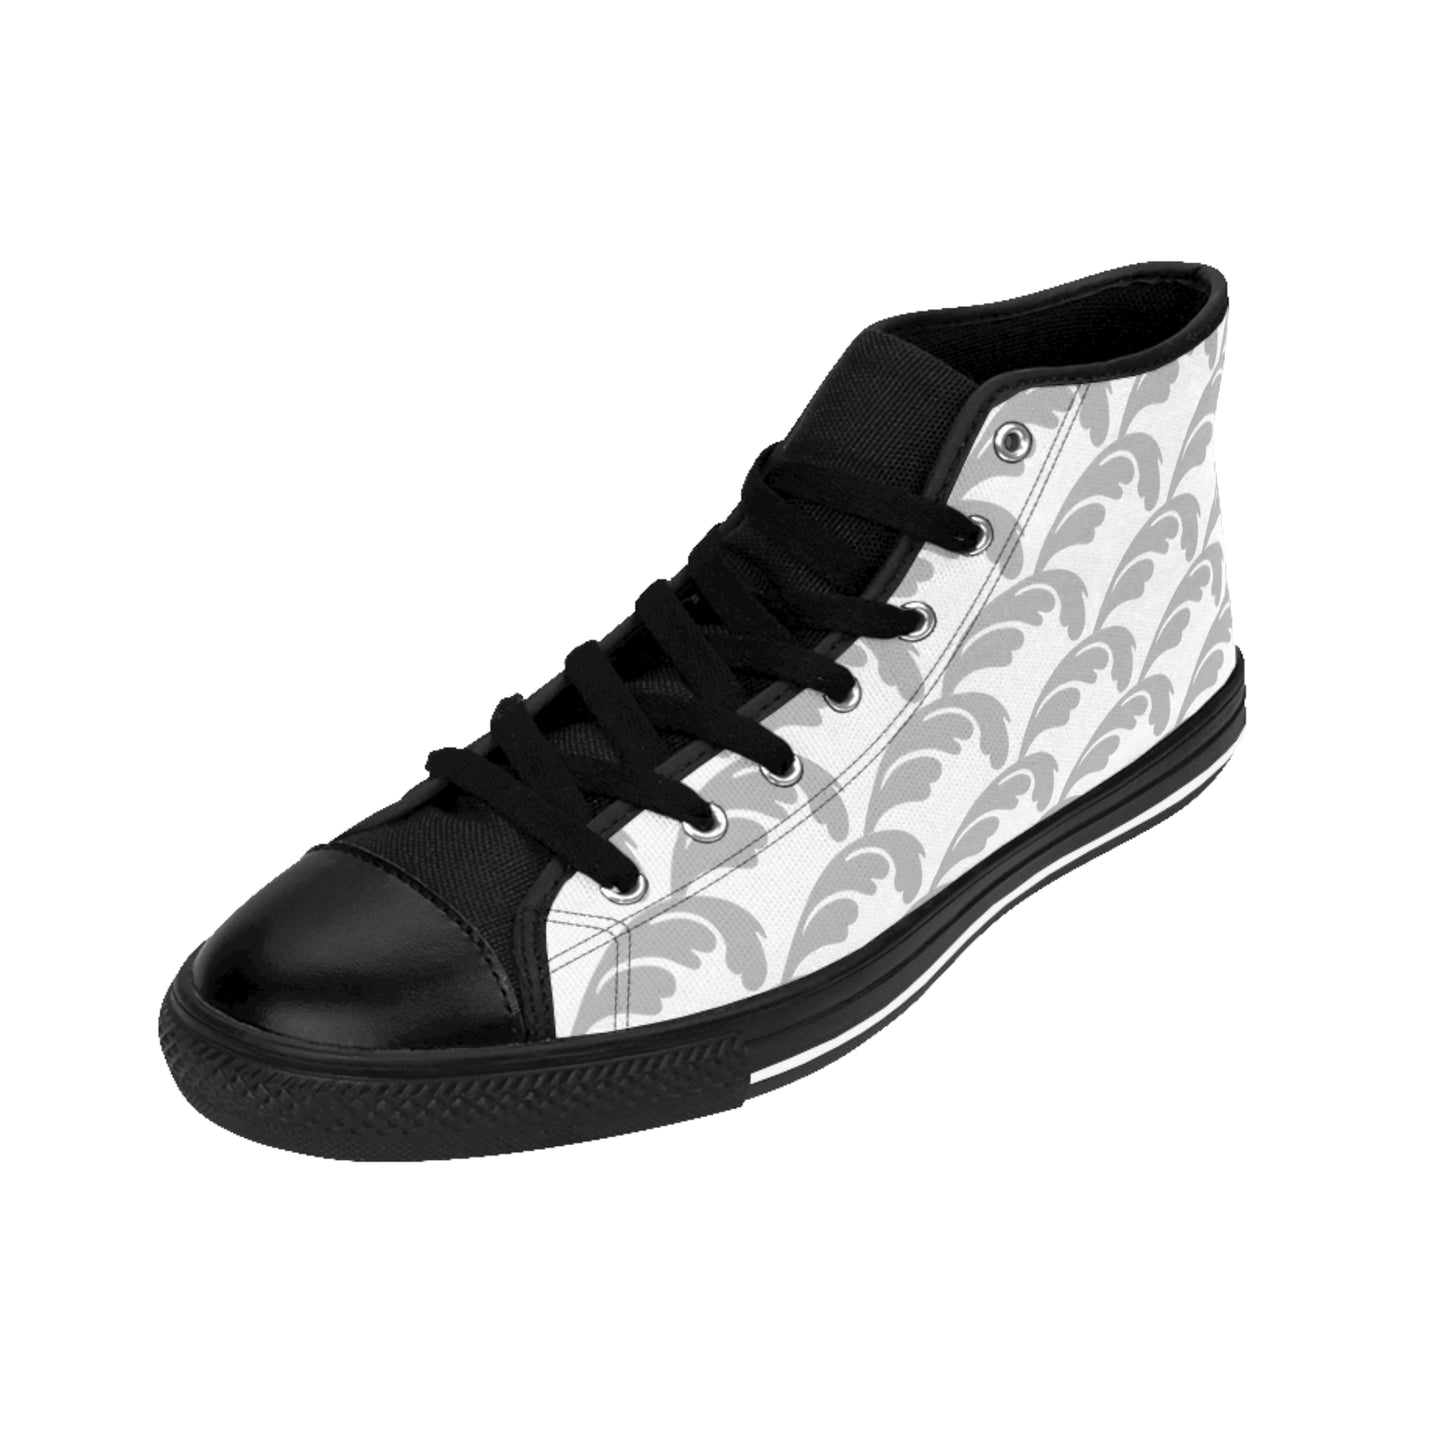 Women's Beautiful Beloved One Flourish - High-top Sneakers (wht/silver)